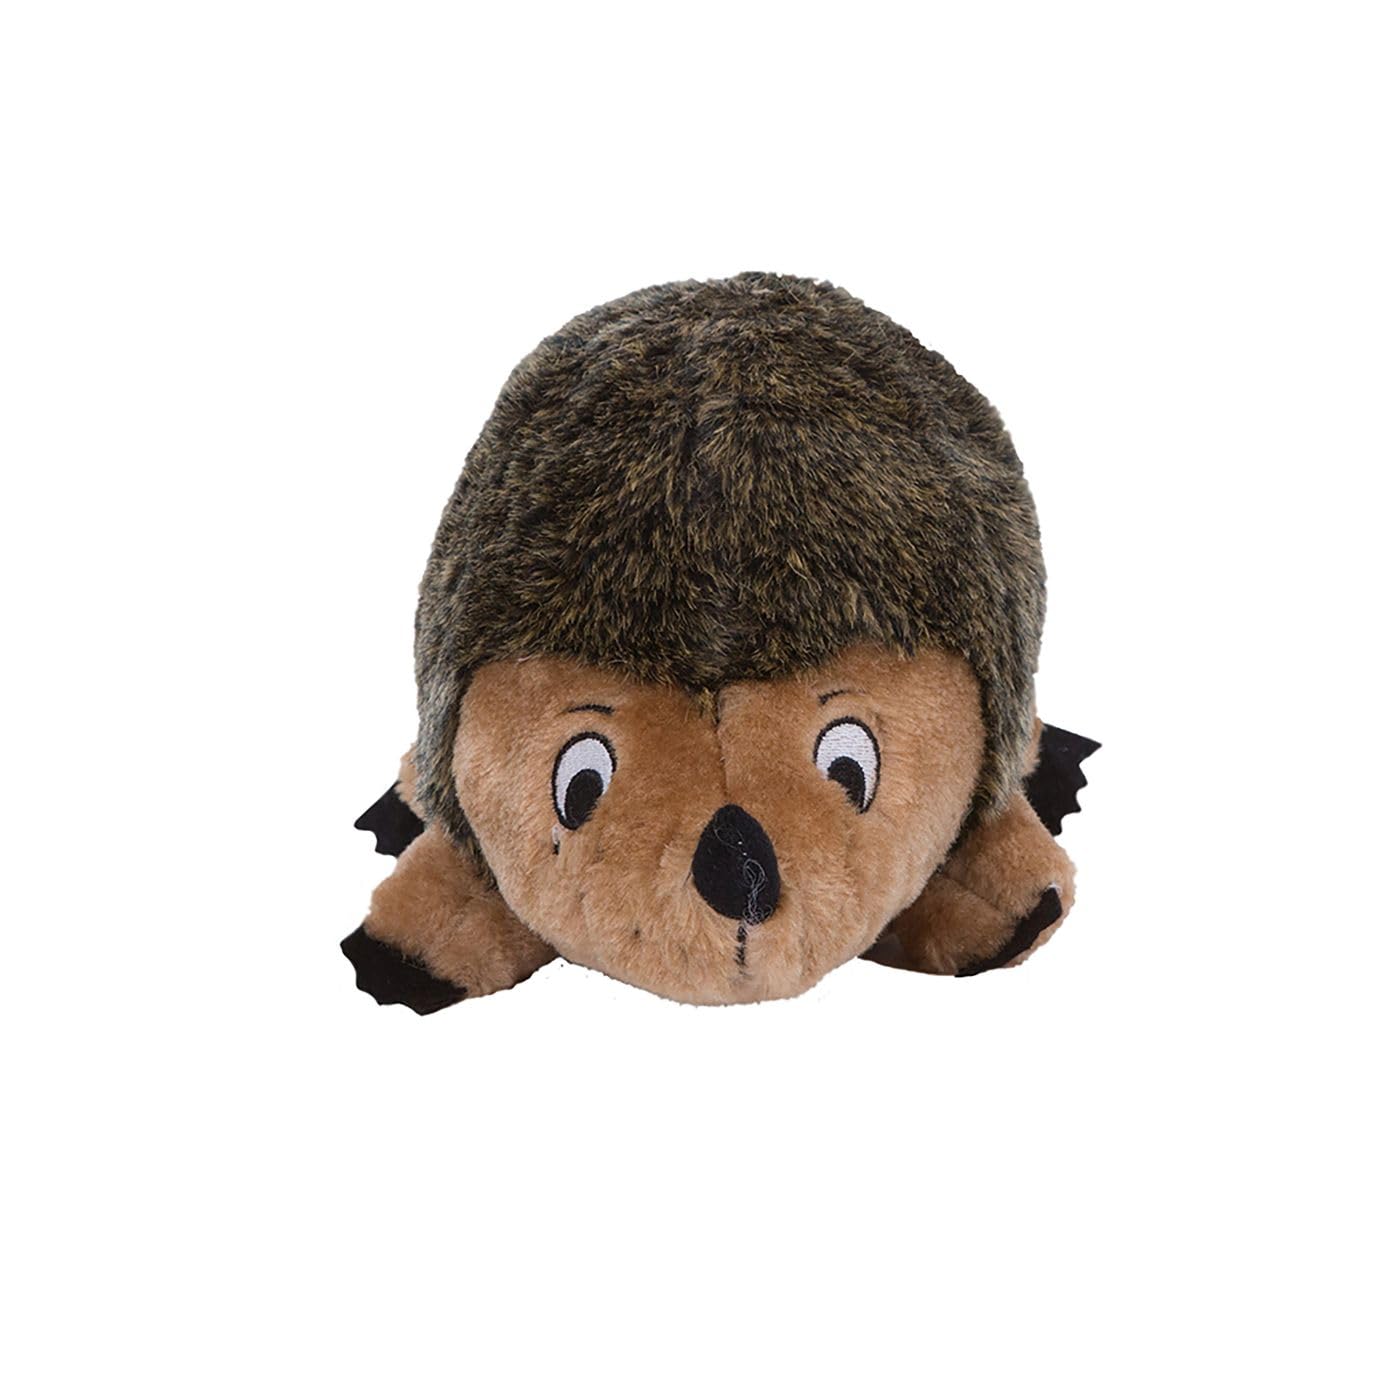 Outward Hound Hedgehogz Small Plush Dog Toy 3 for $8 ($2.66/ea) & More + Free S&H w/ Prime or $35+